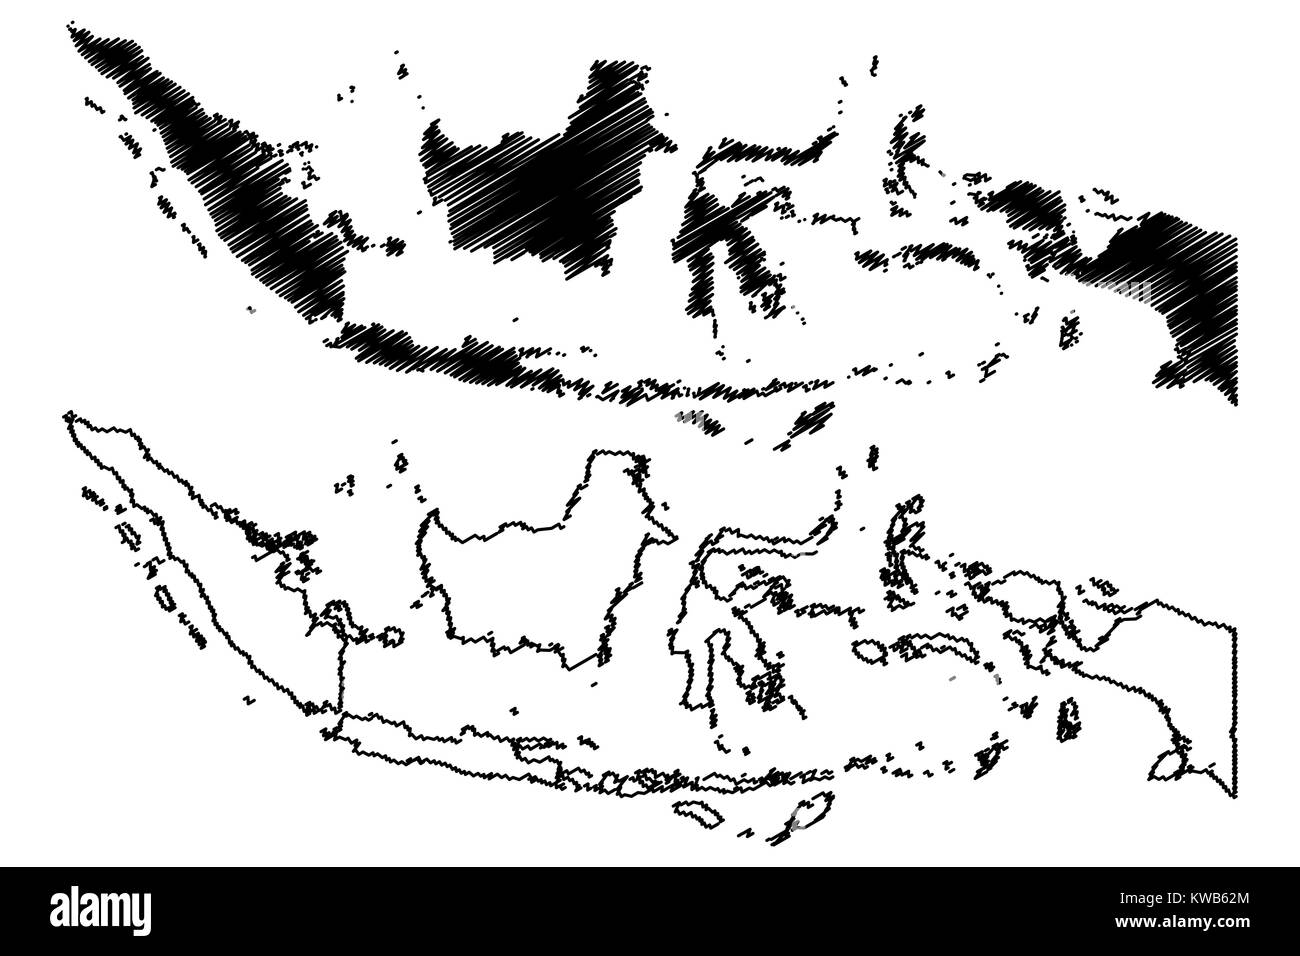 Indonesia map vector illustration, scribble sketch Republic of Indonesia Stock Vector